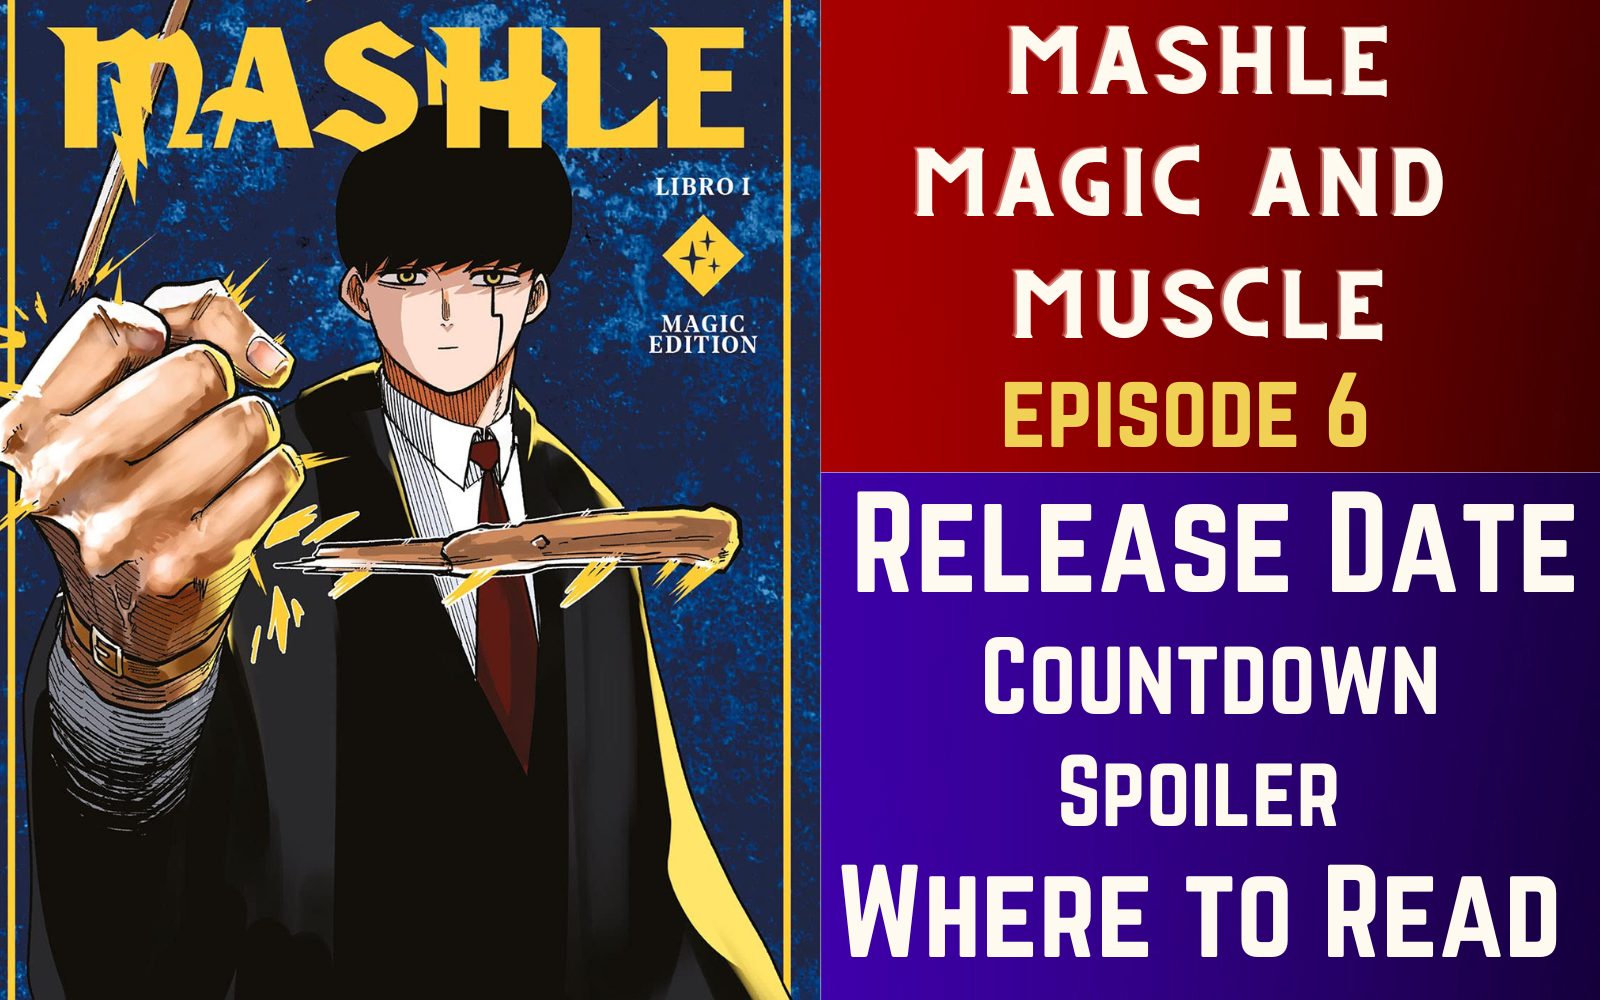 Mashle: Magic and Muscles' review: “The Challenging Magic User”